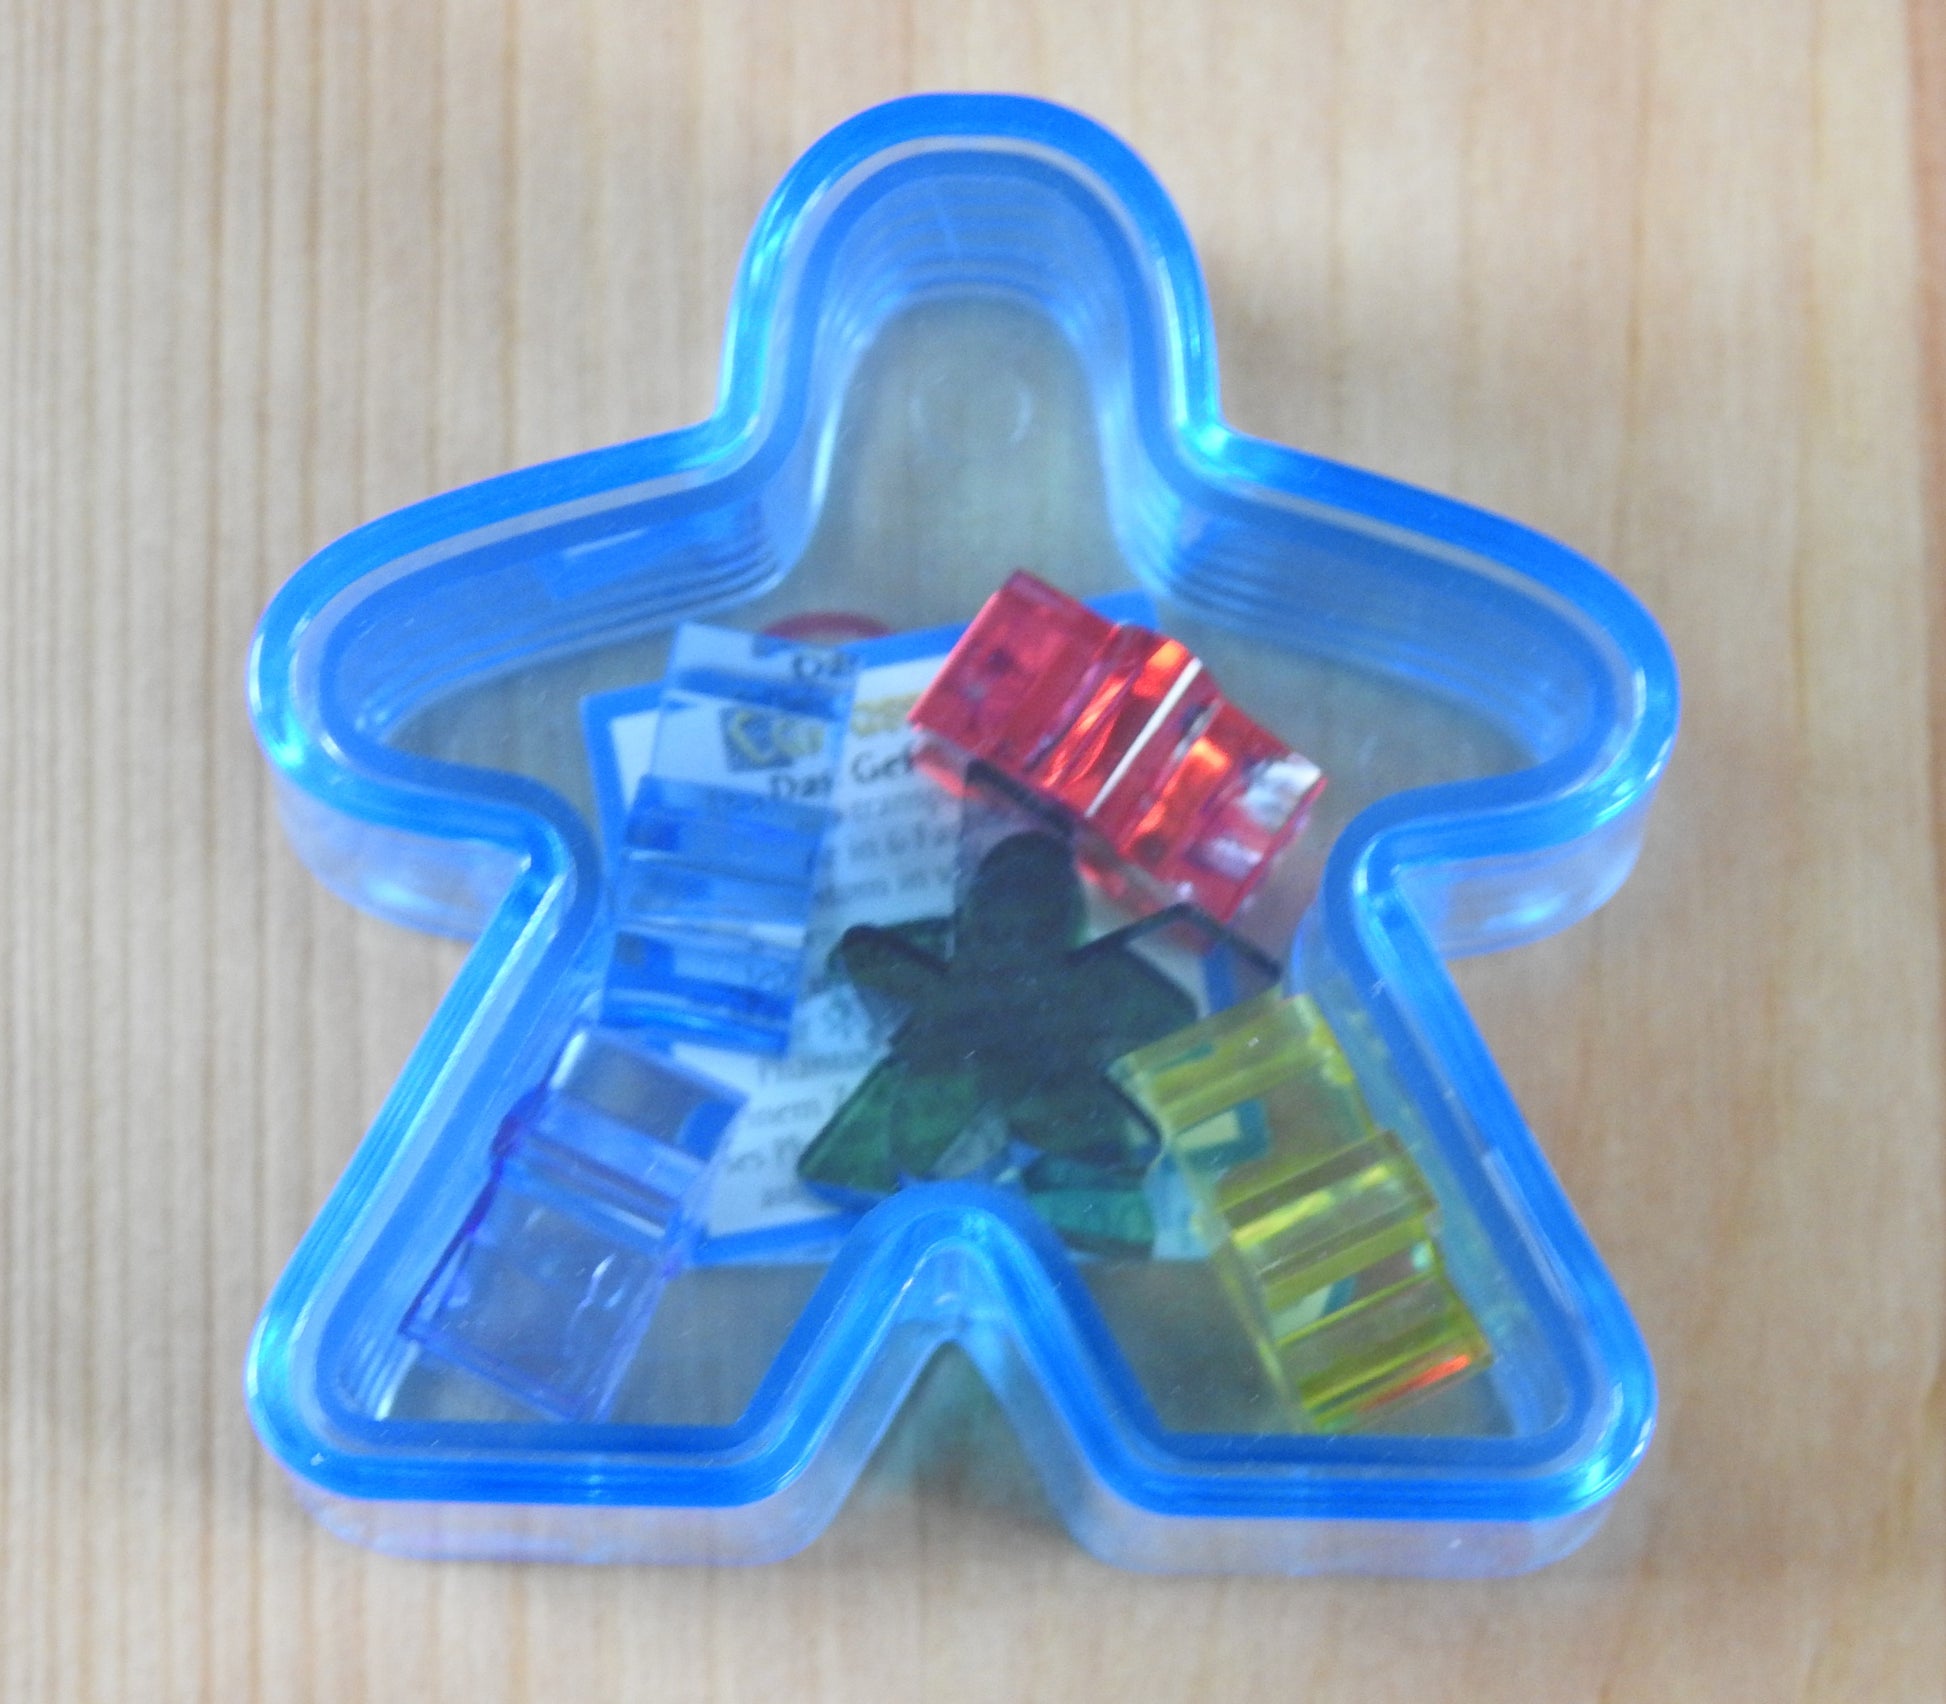 Blue Meeple box with the six mini meeples shown inside!